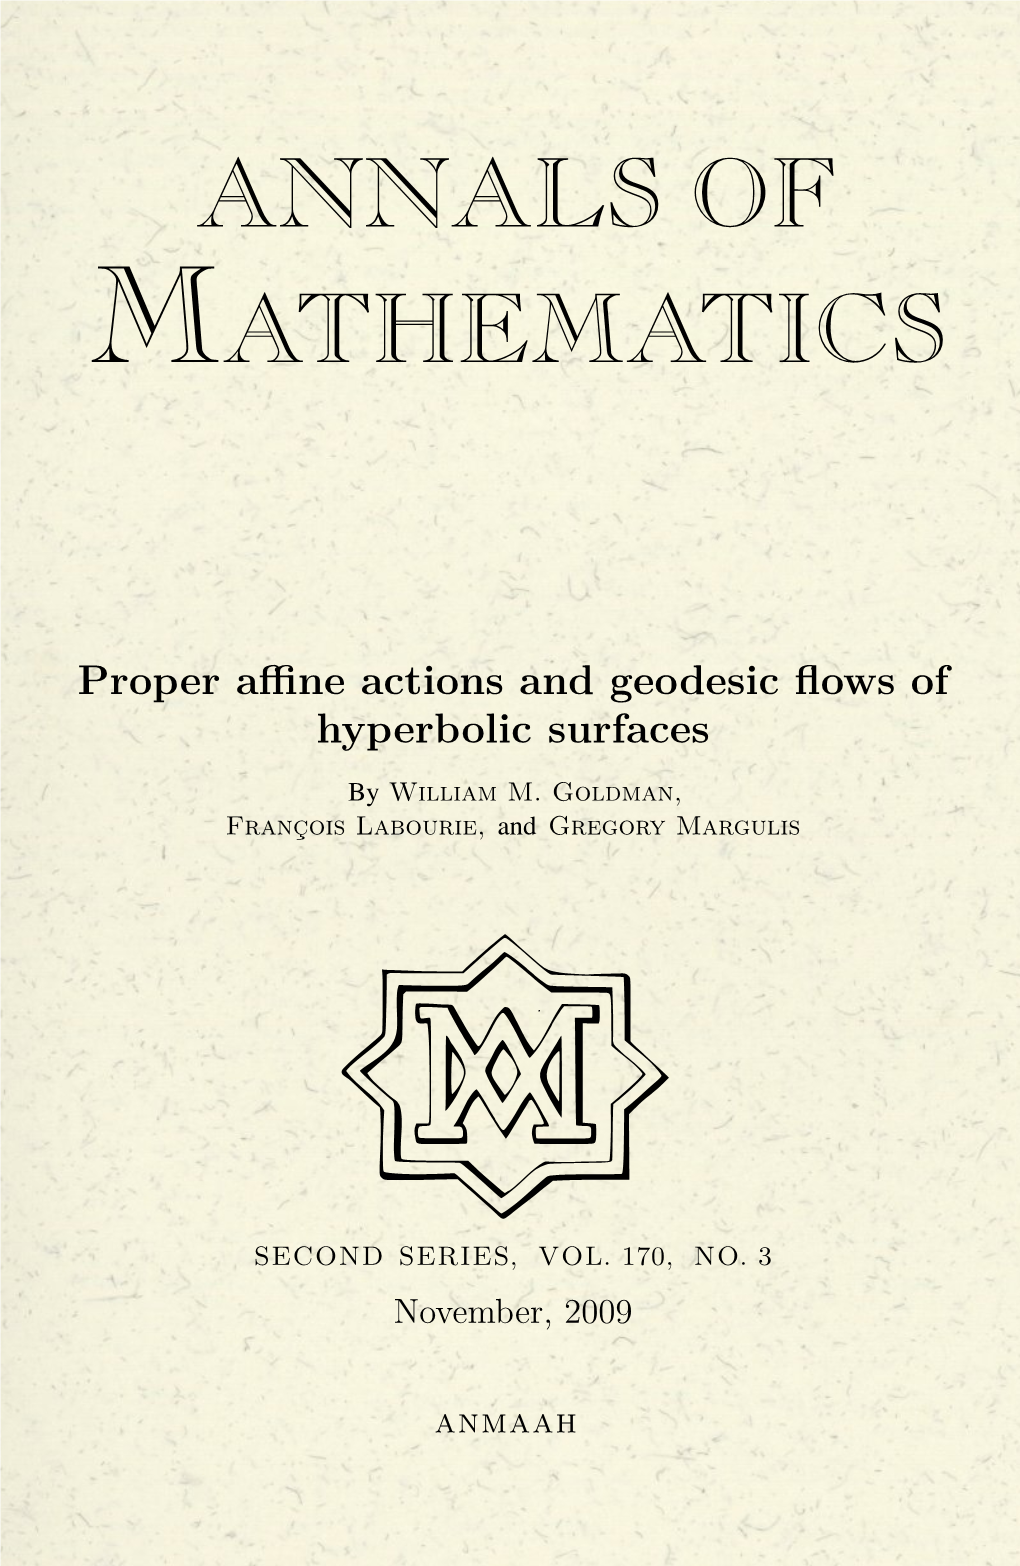 Proper Affine Actions and Geodesic Flows of Hyperbolic Surfaces